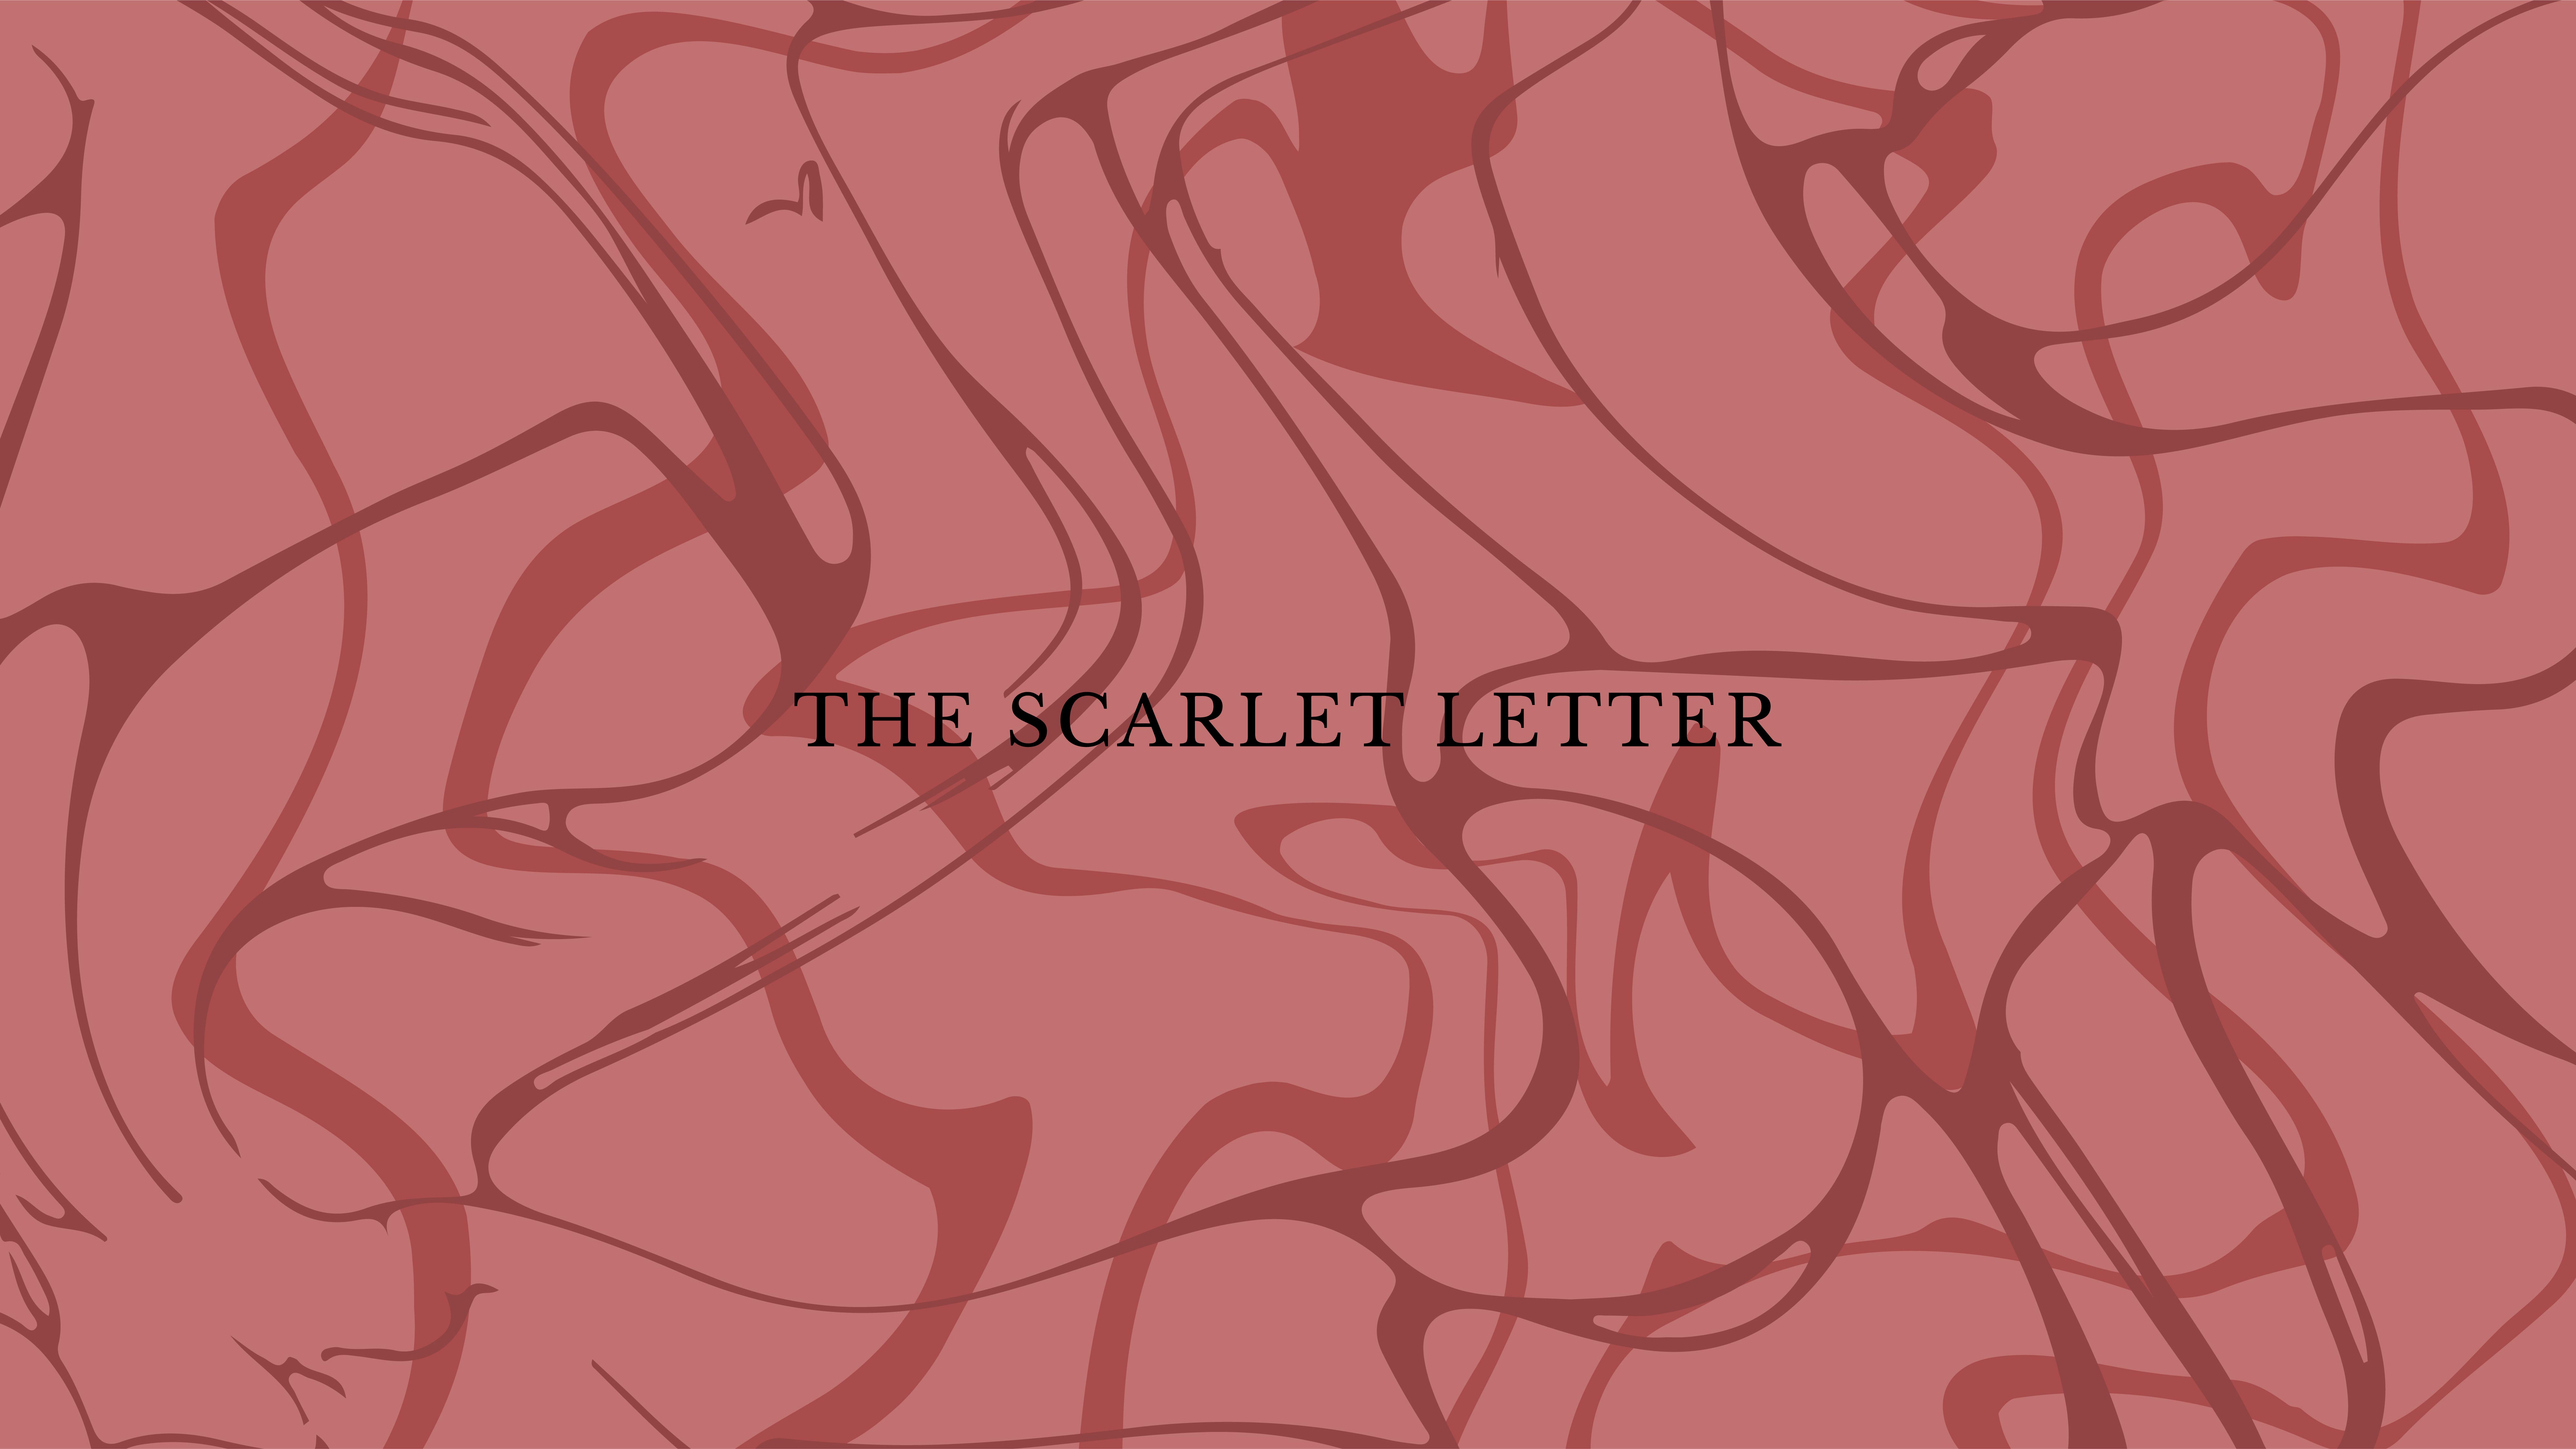 The scarlet letter cover image - Marble